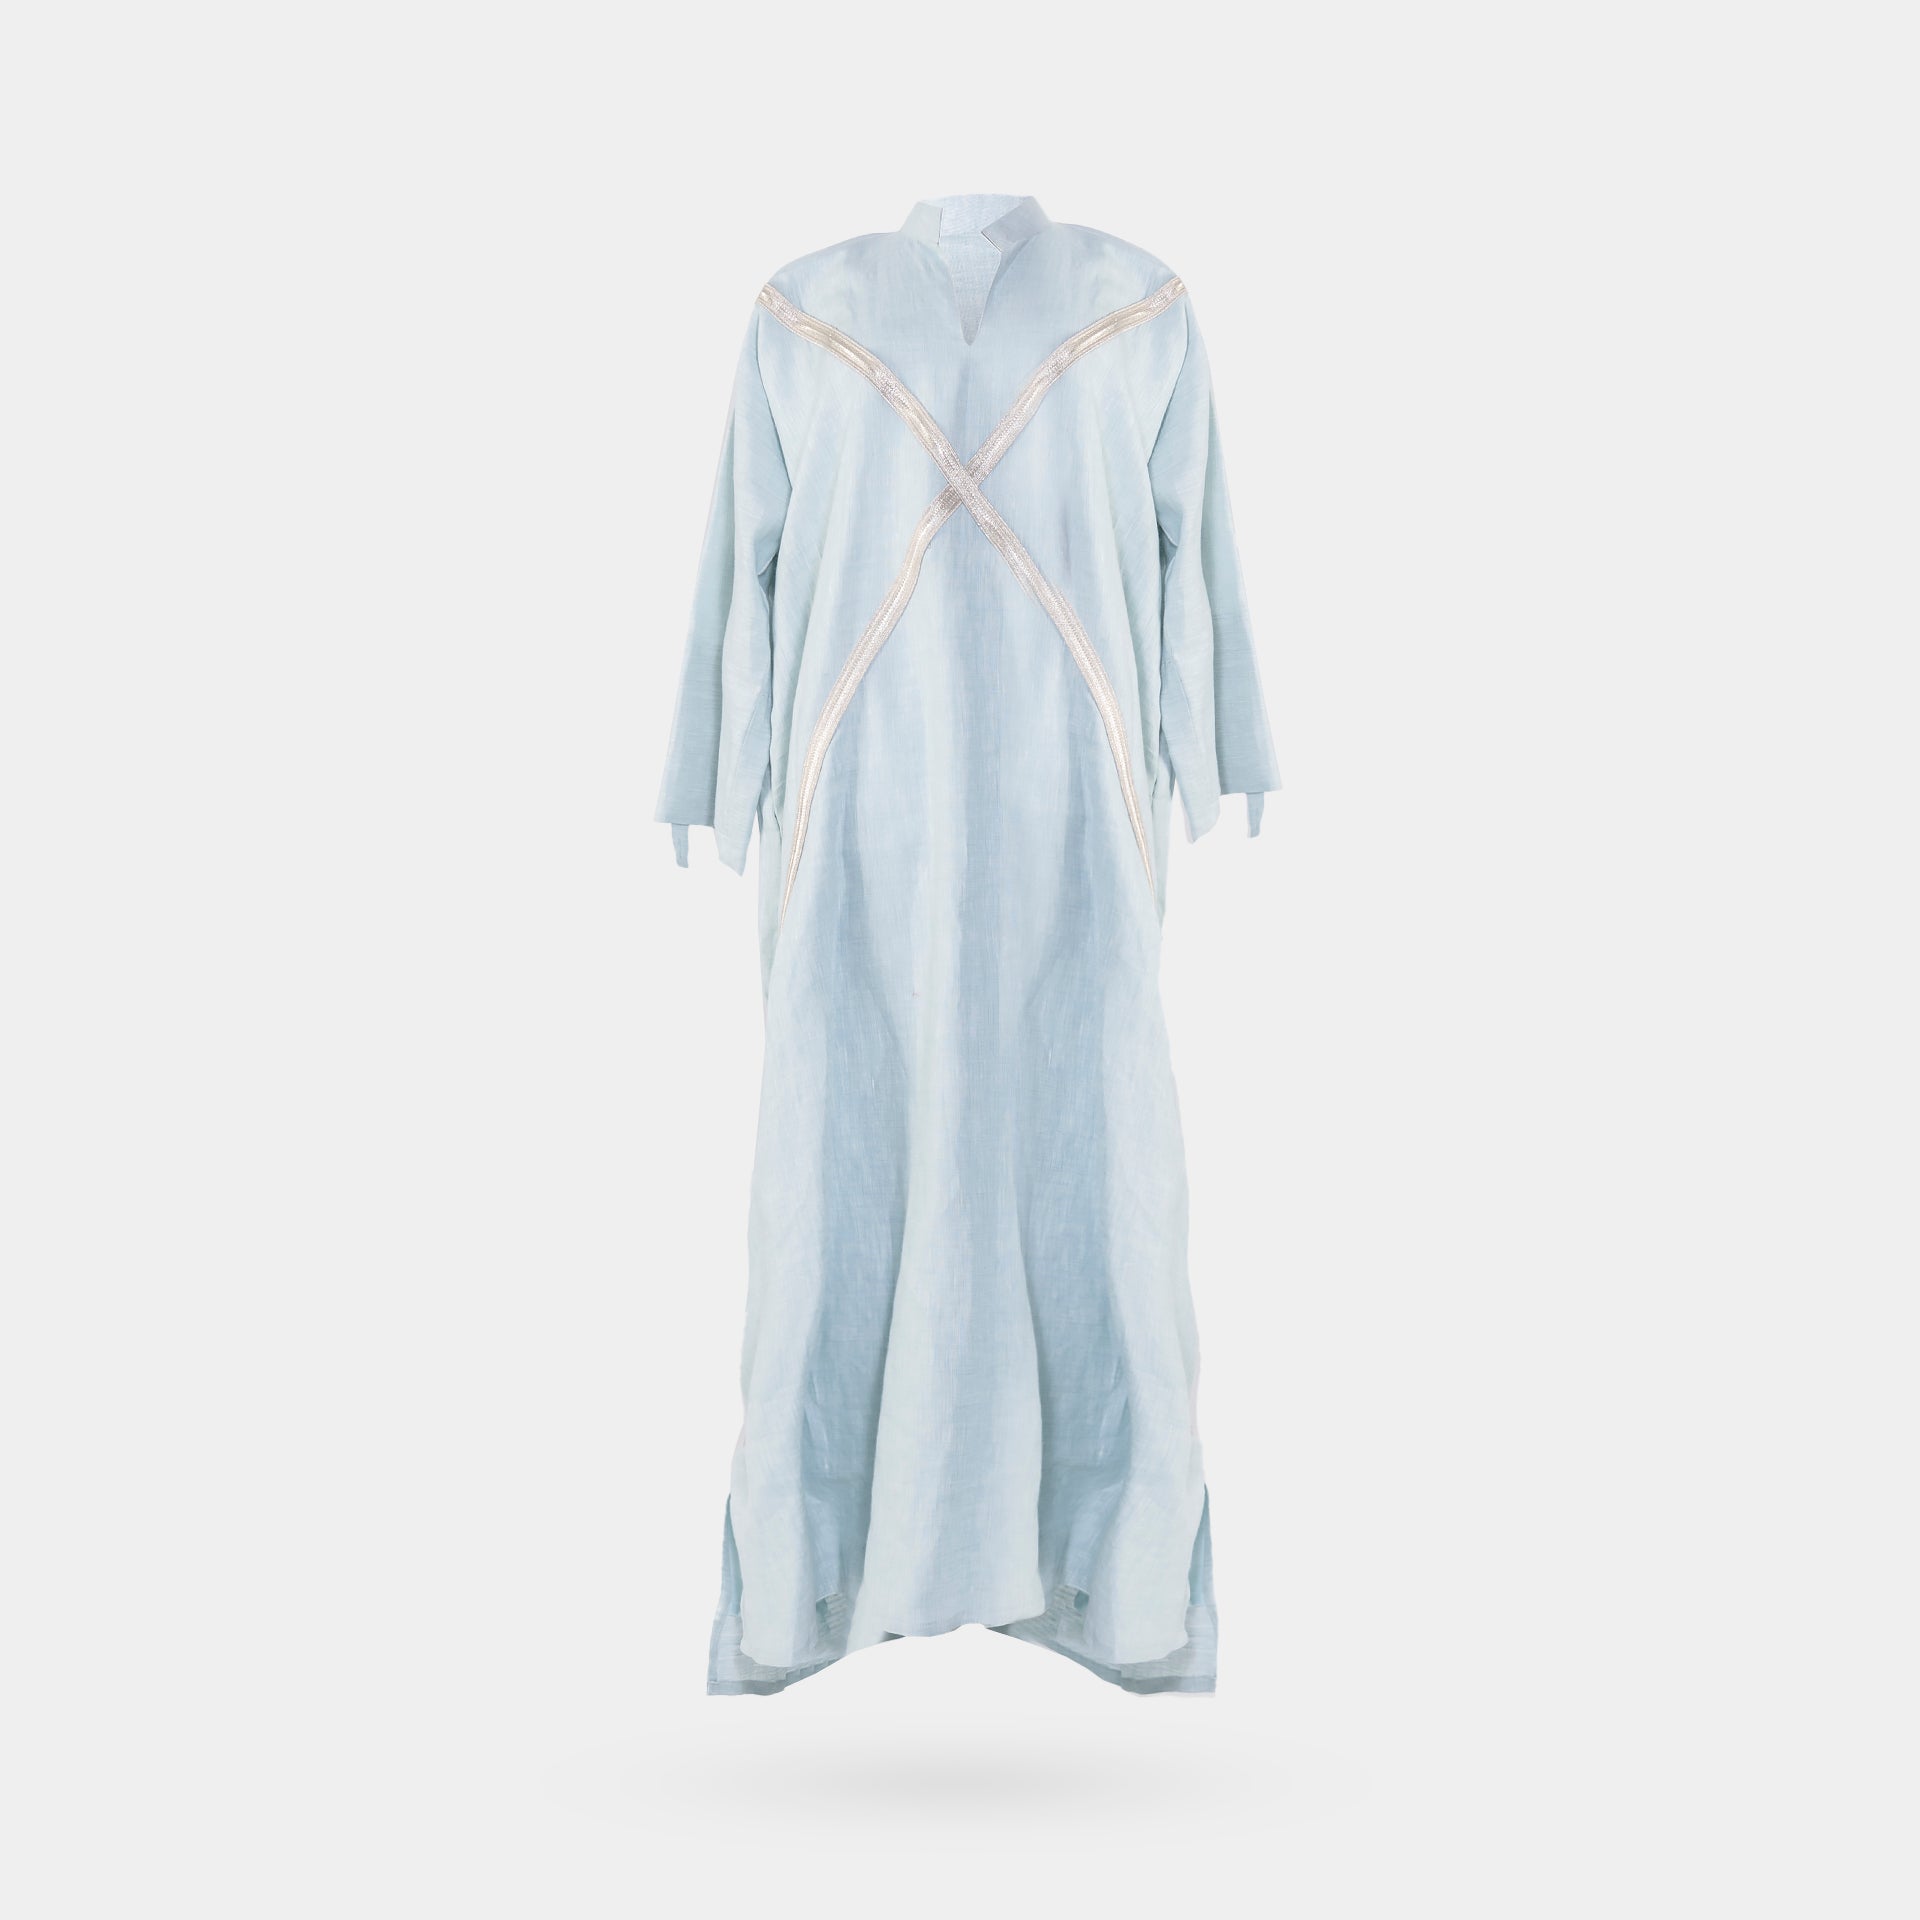 Light Blue Long Abaya with Long Sleeves and a Collar From Darzah